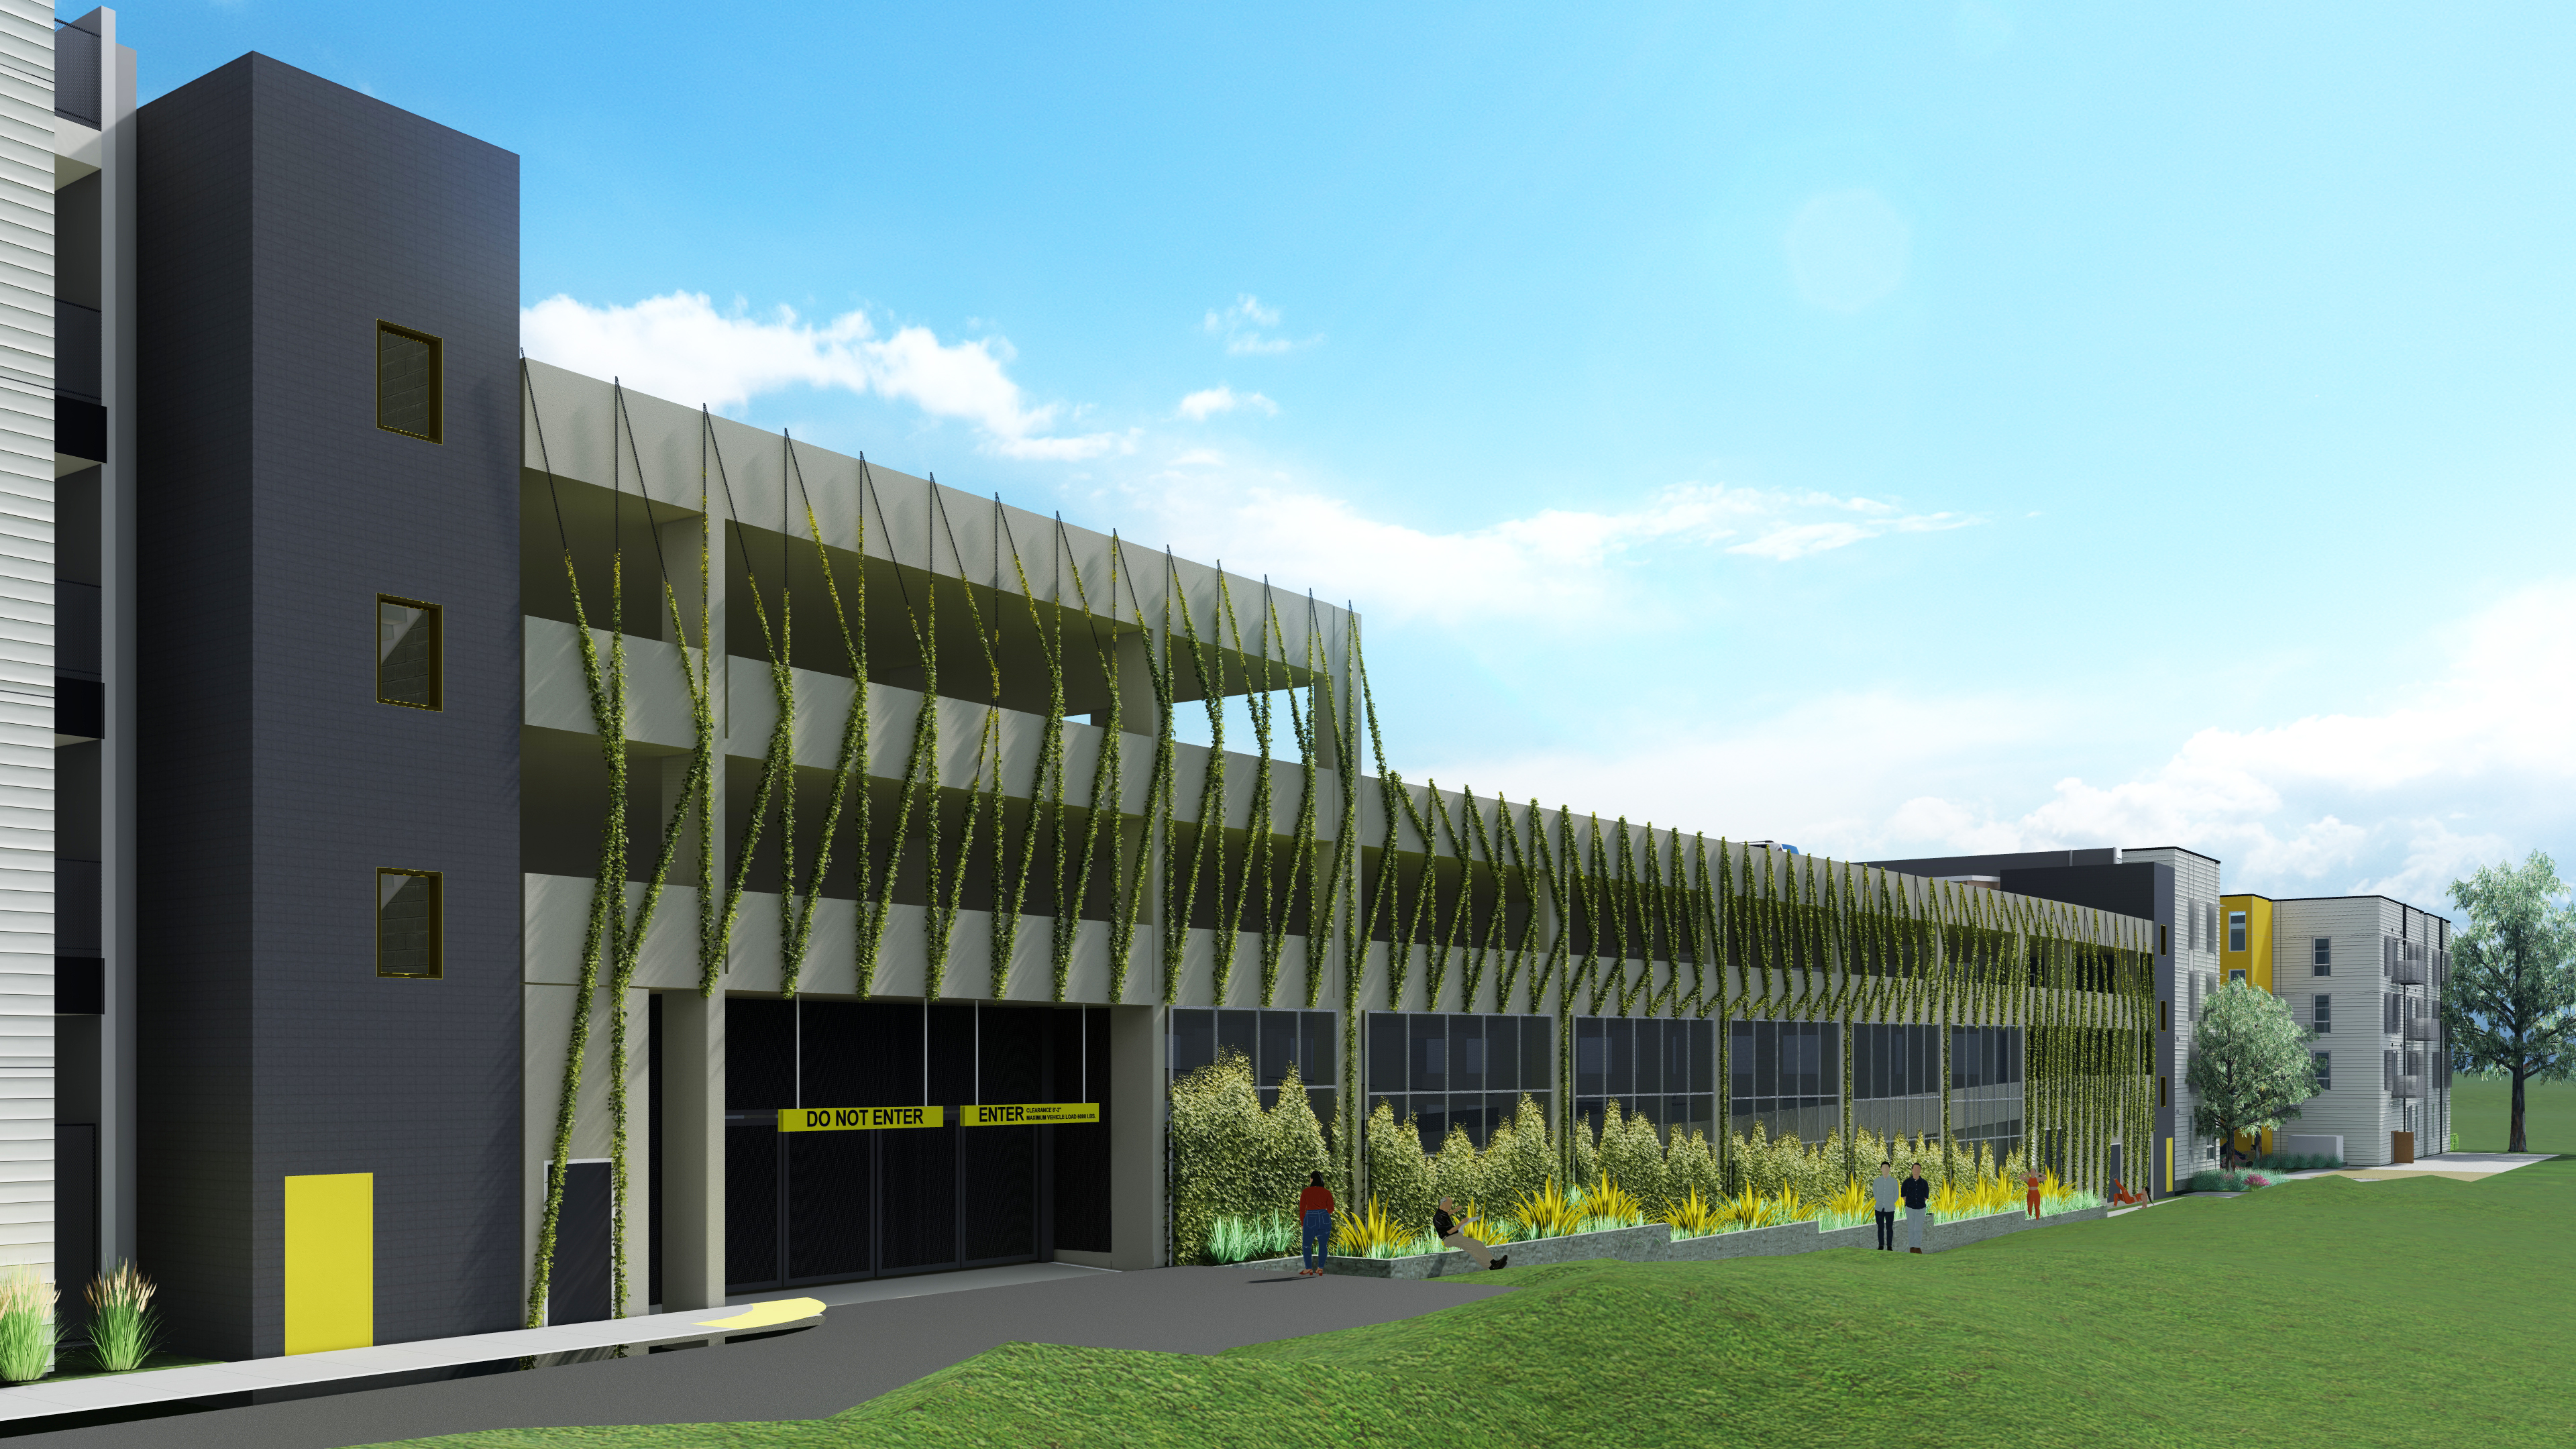 Rendering of parking garage for Midway Village Phase 1 in Daly City, Ca.